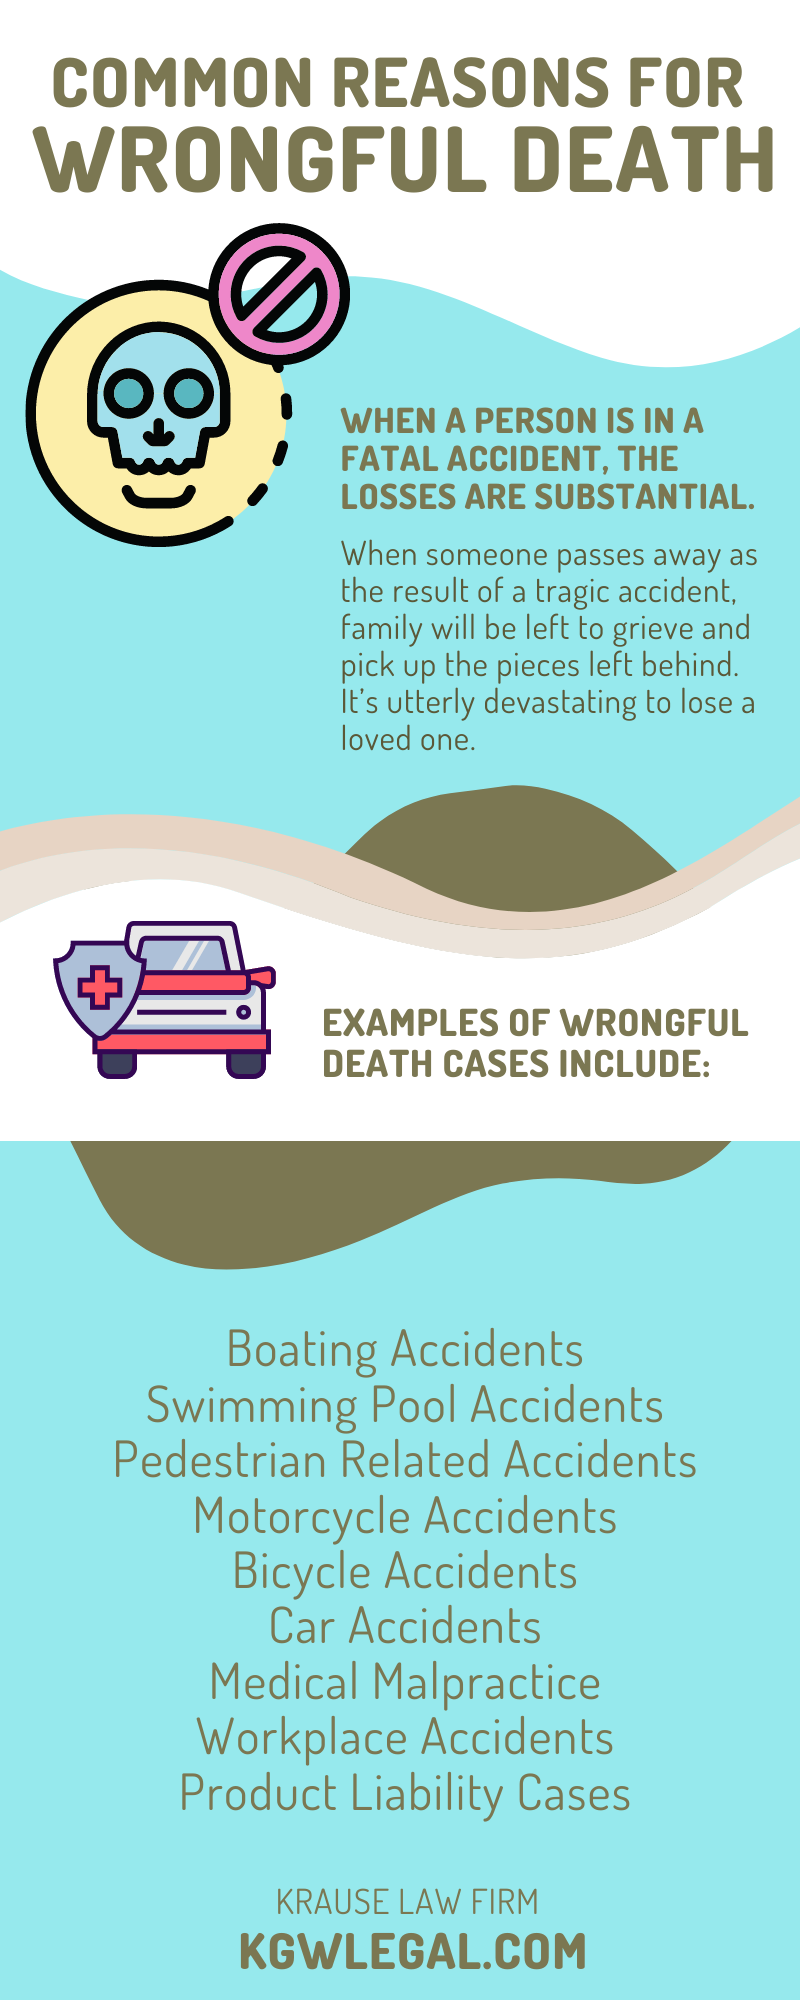 Common Reasons for Wrongful Death Infographic